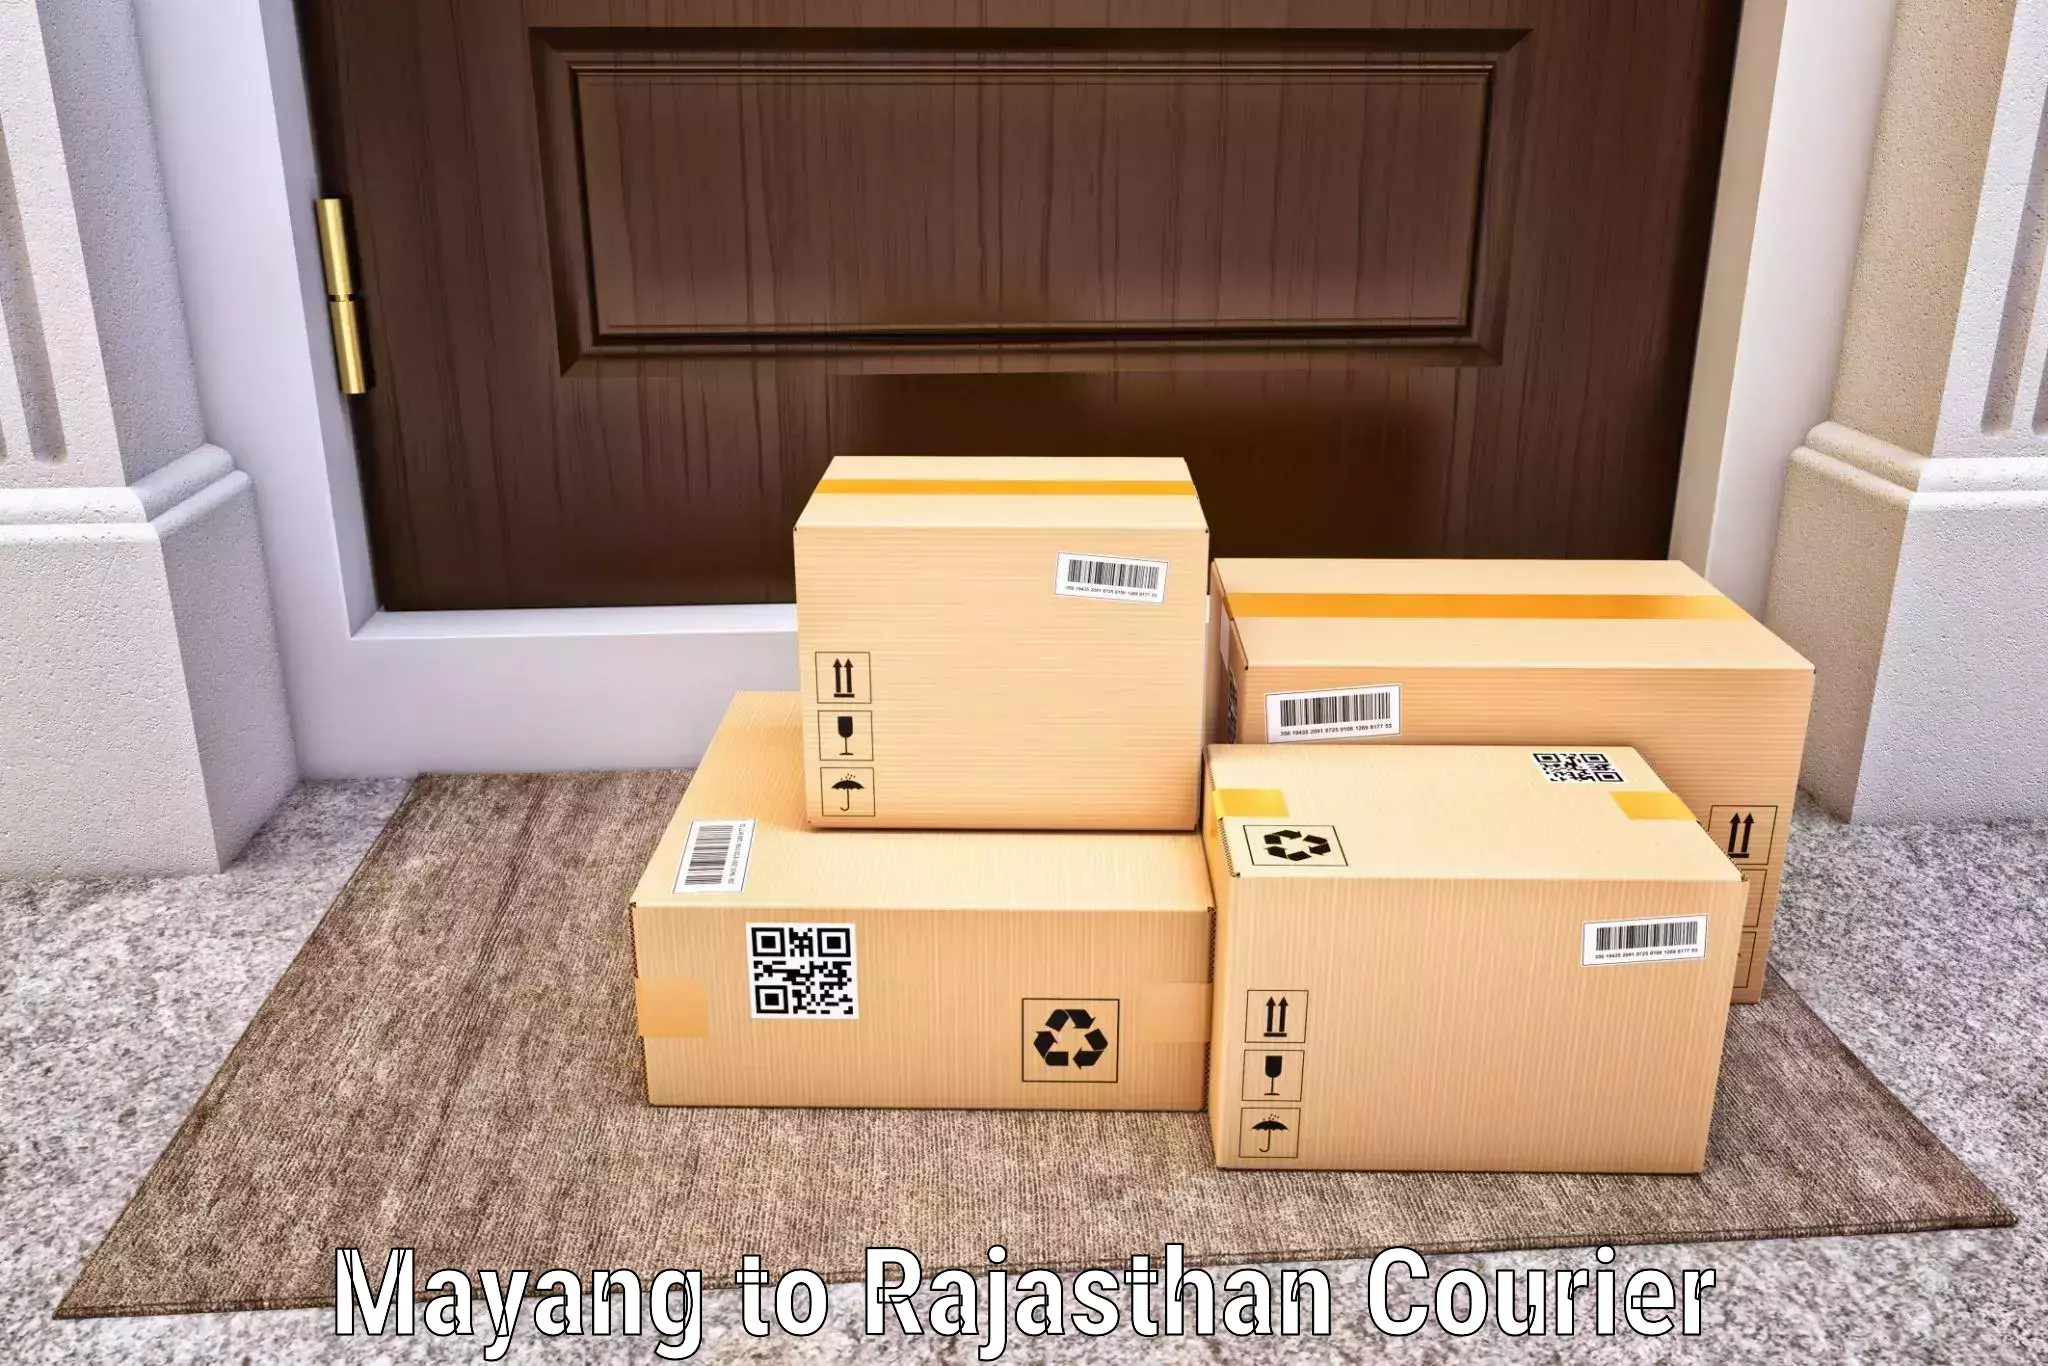 Enhanced shipping experience in Mayang to Jaipur